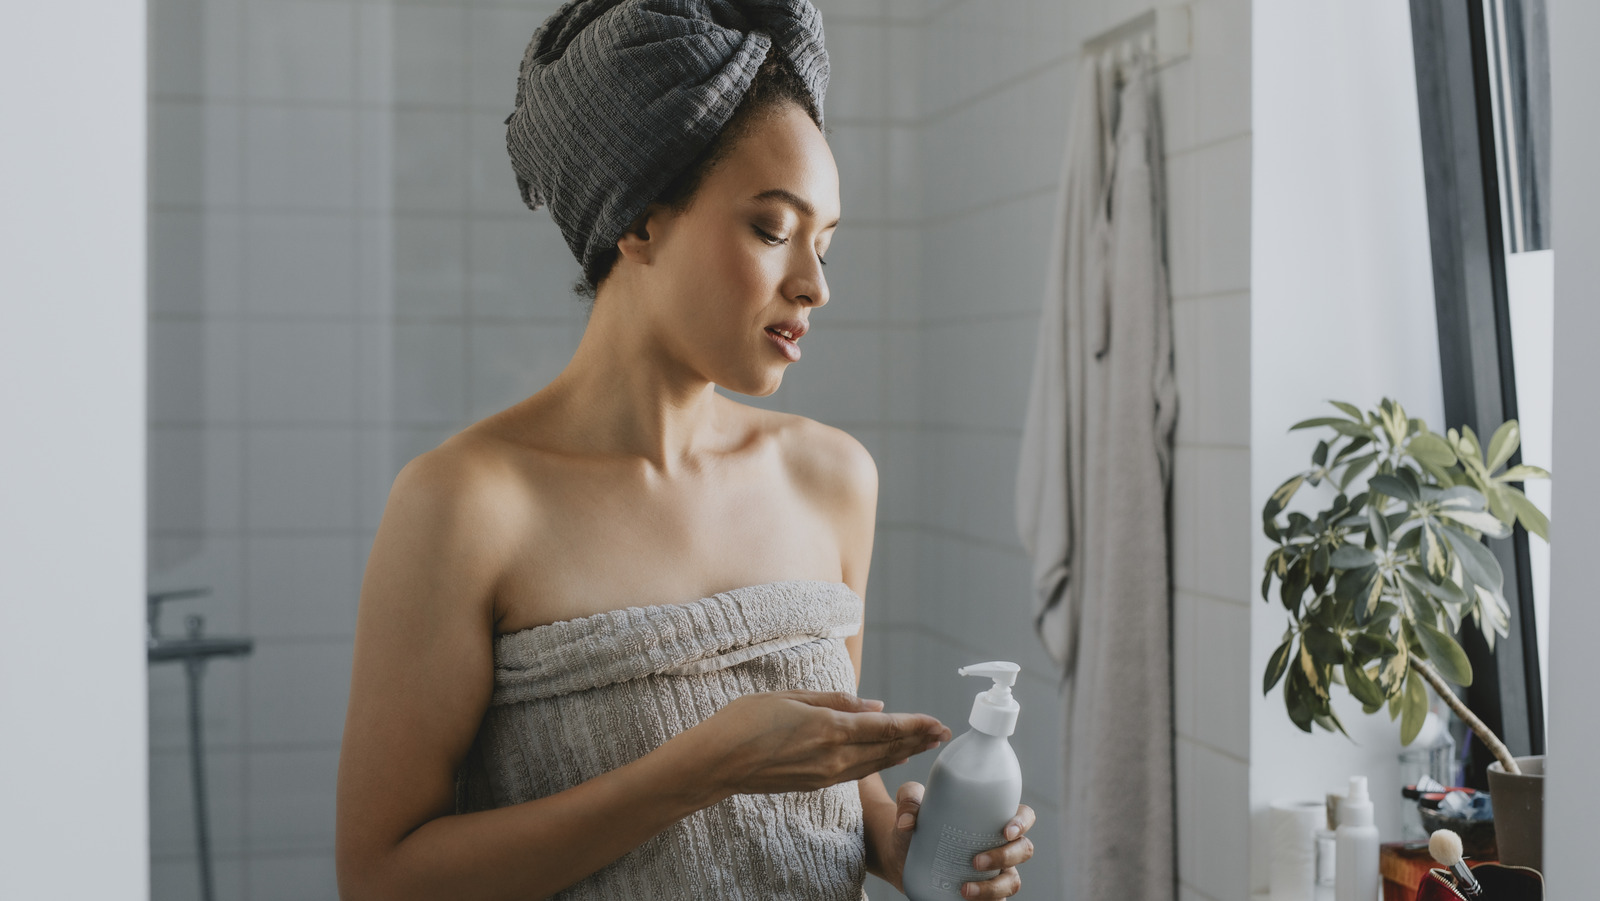 Everything Shower: Why This Self-Care Routine Is Taking Over TikTok